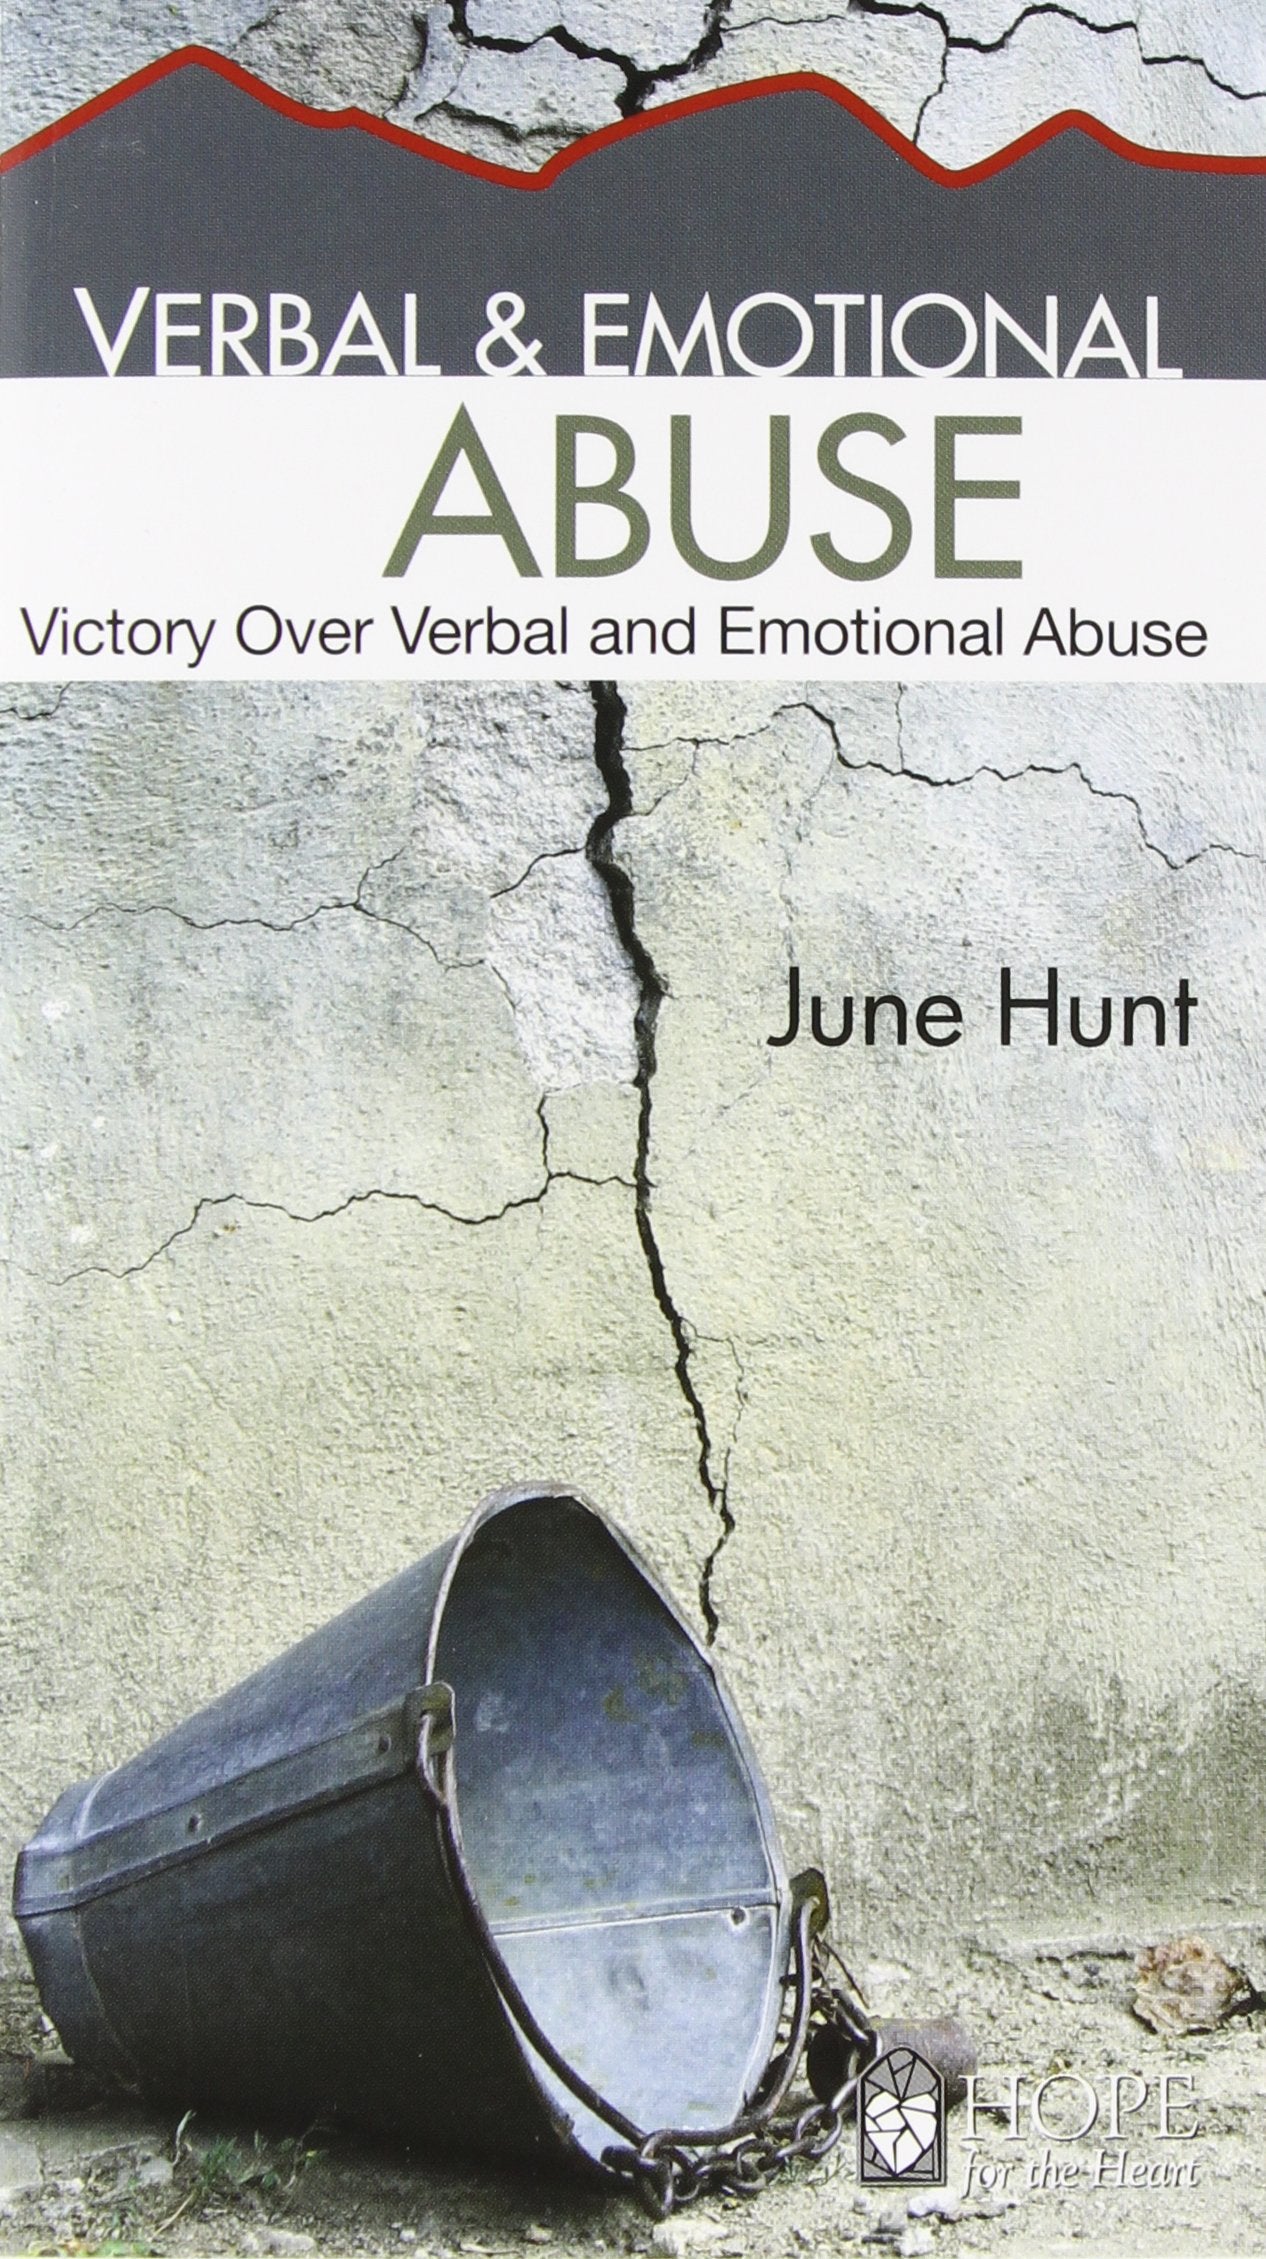 Verbal and Emotional Abuse: Victory Over Verbal and Emotional Abuse (Hope for the Heart)